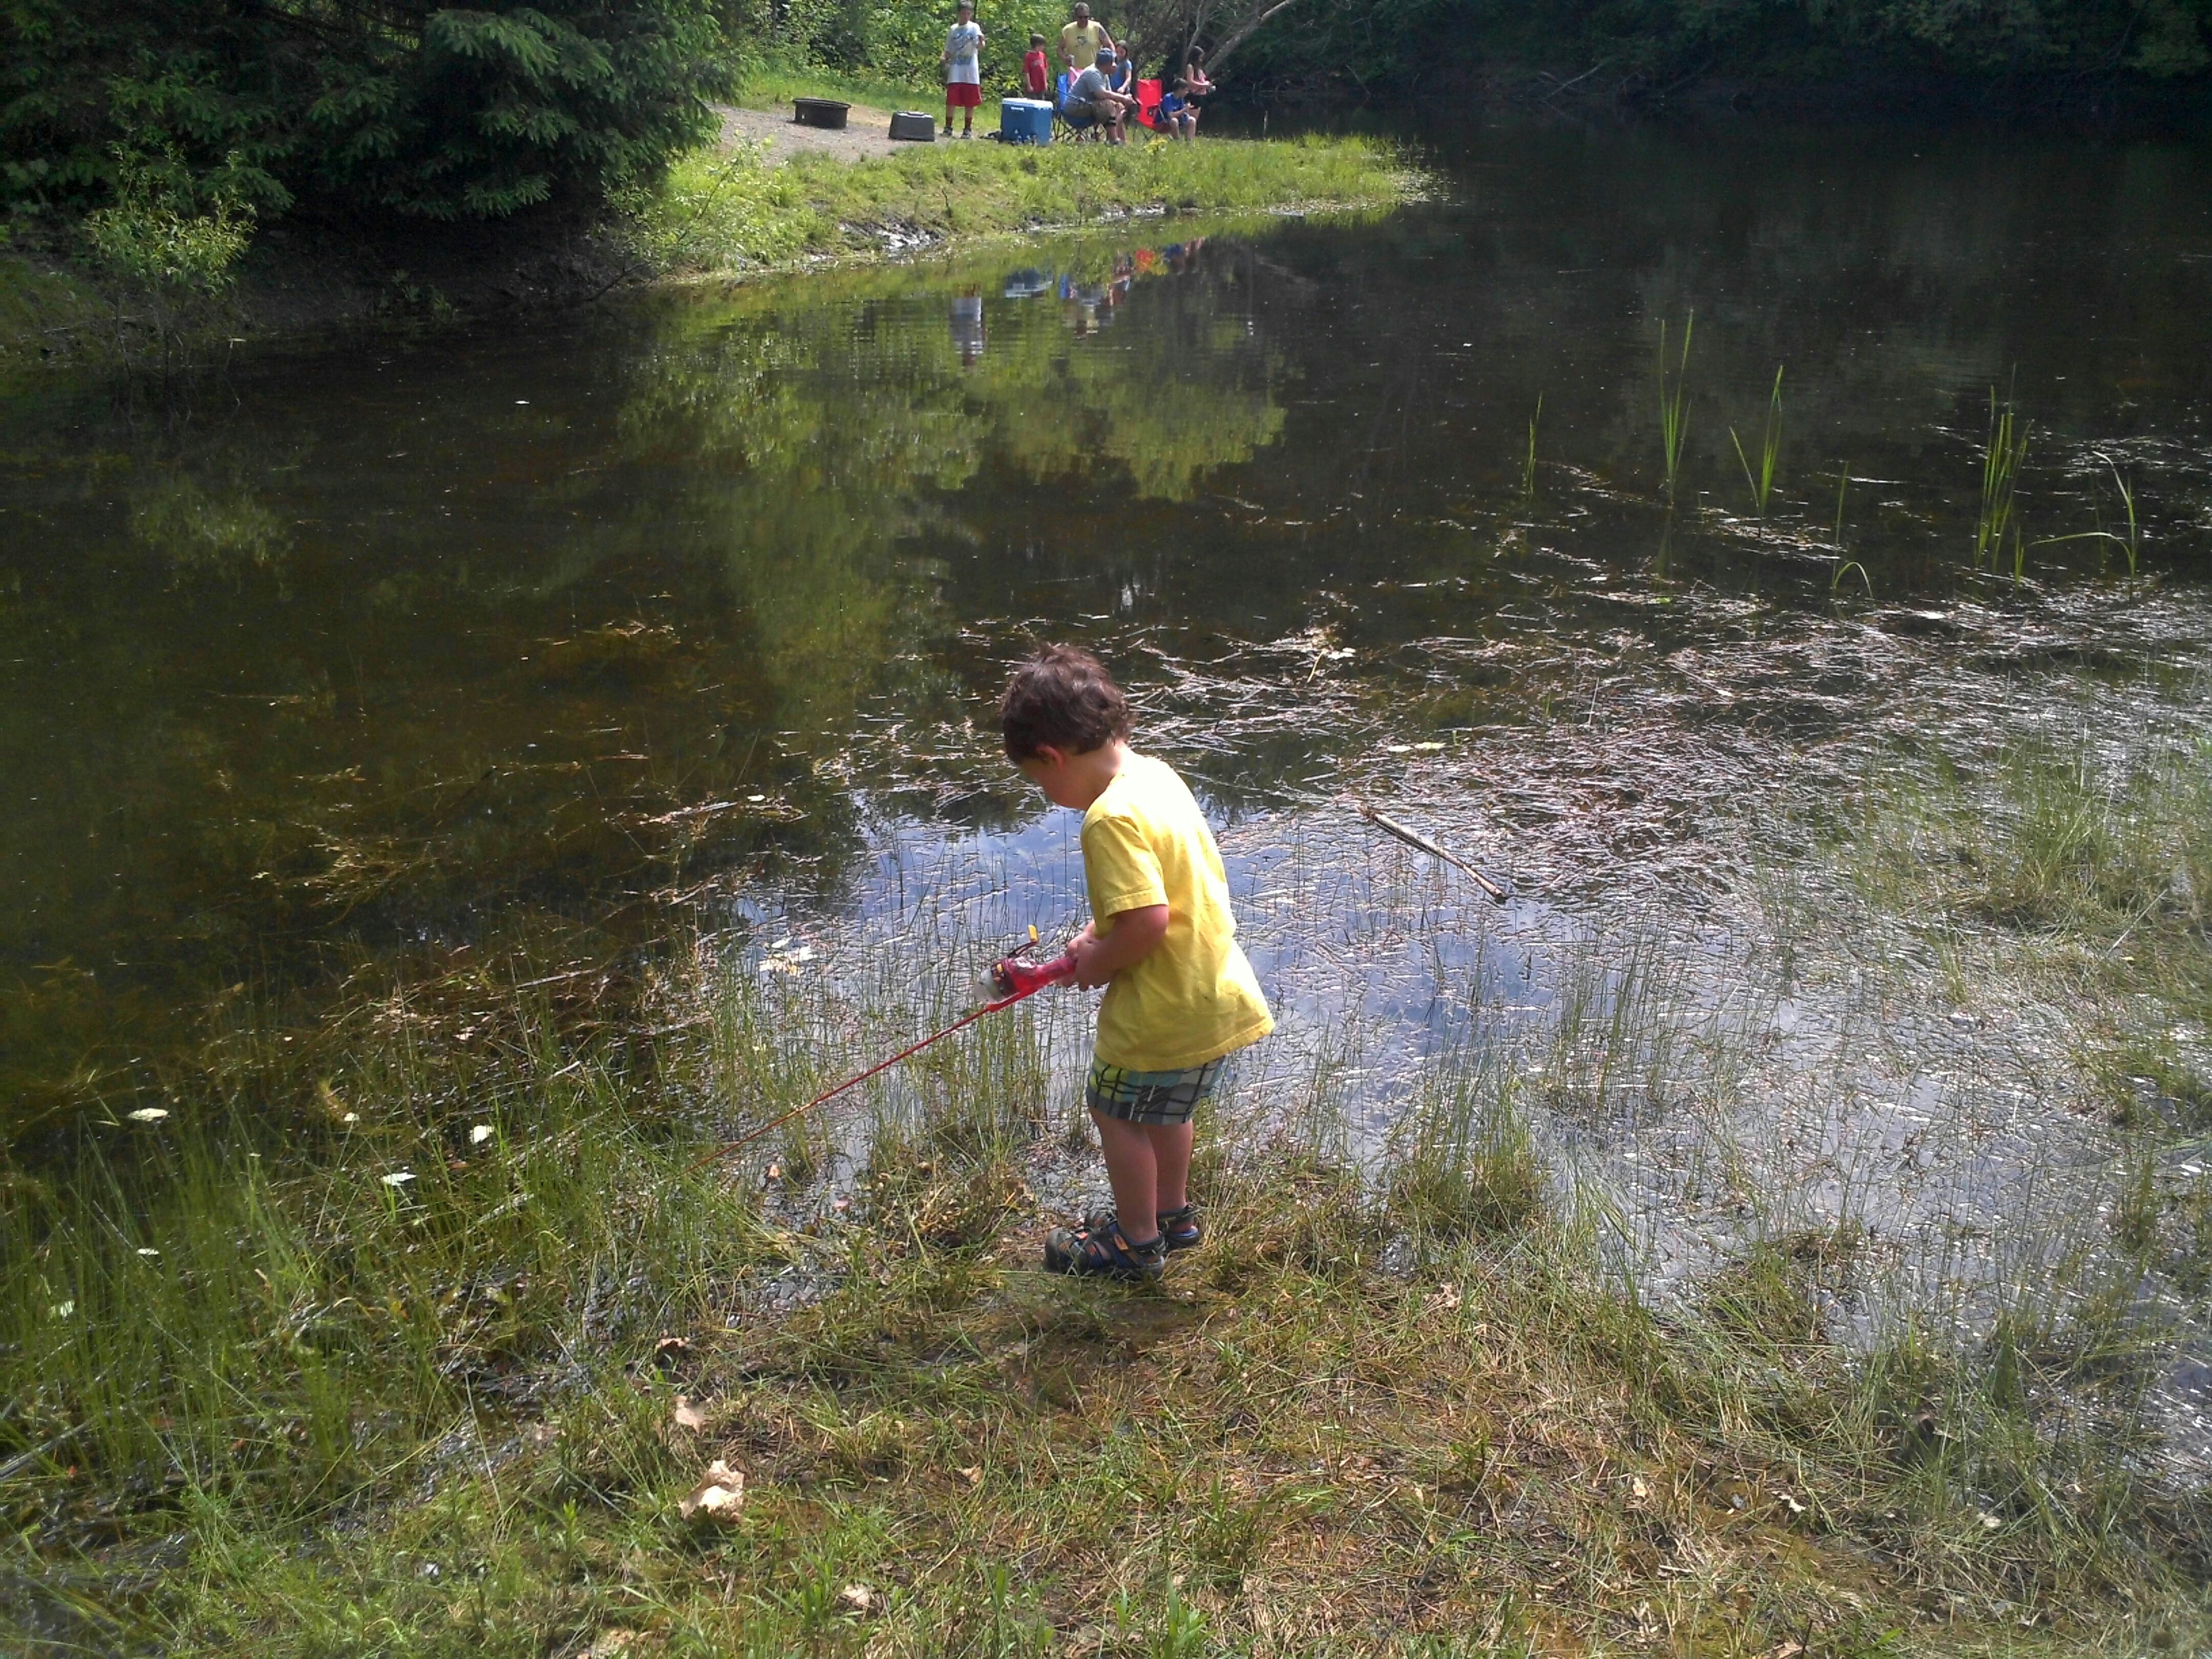 Fishing in the on-site pond 